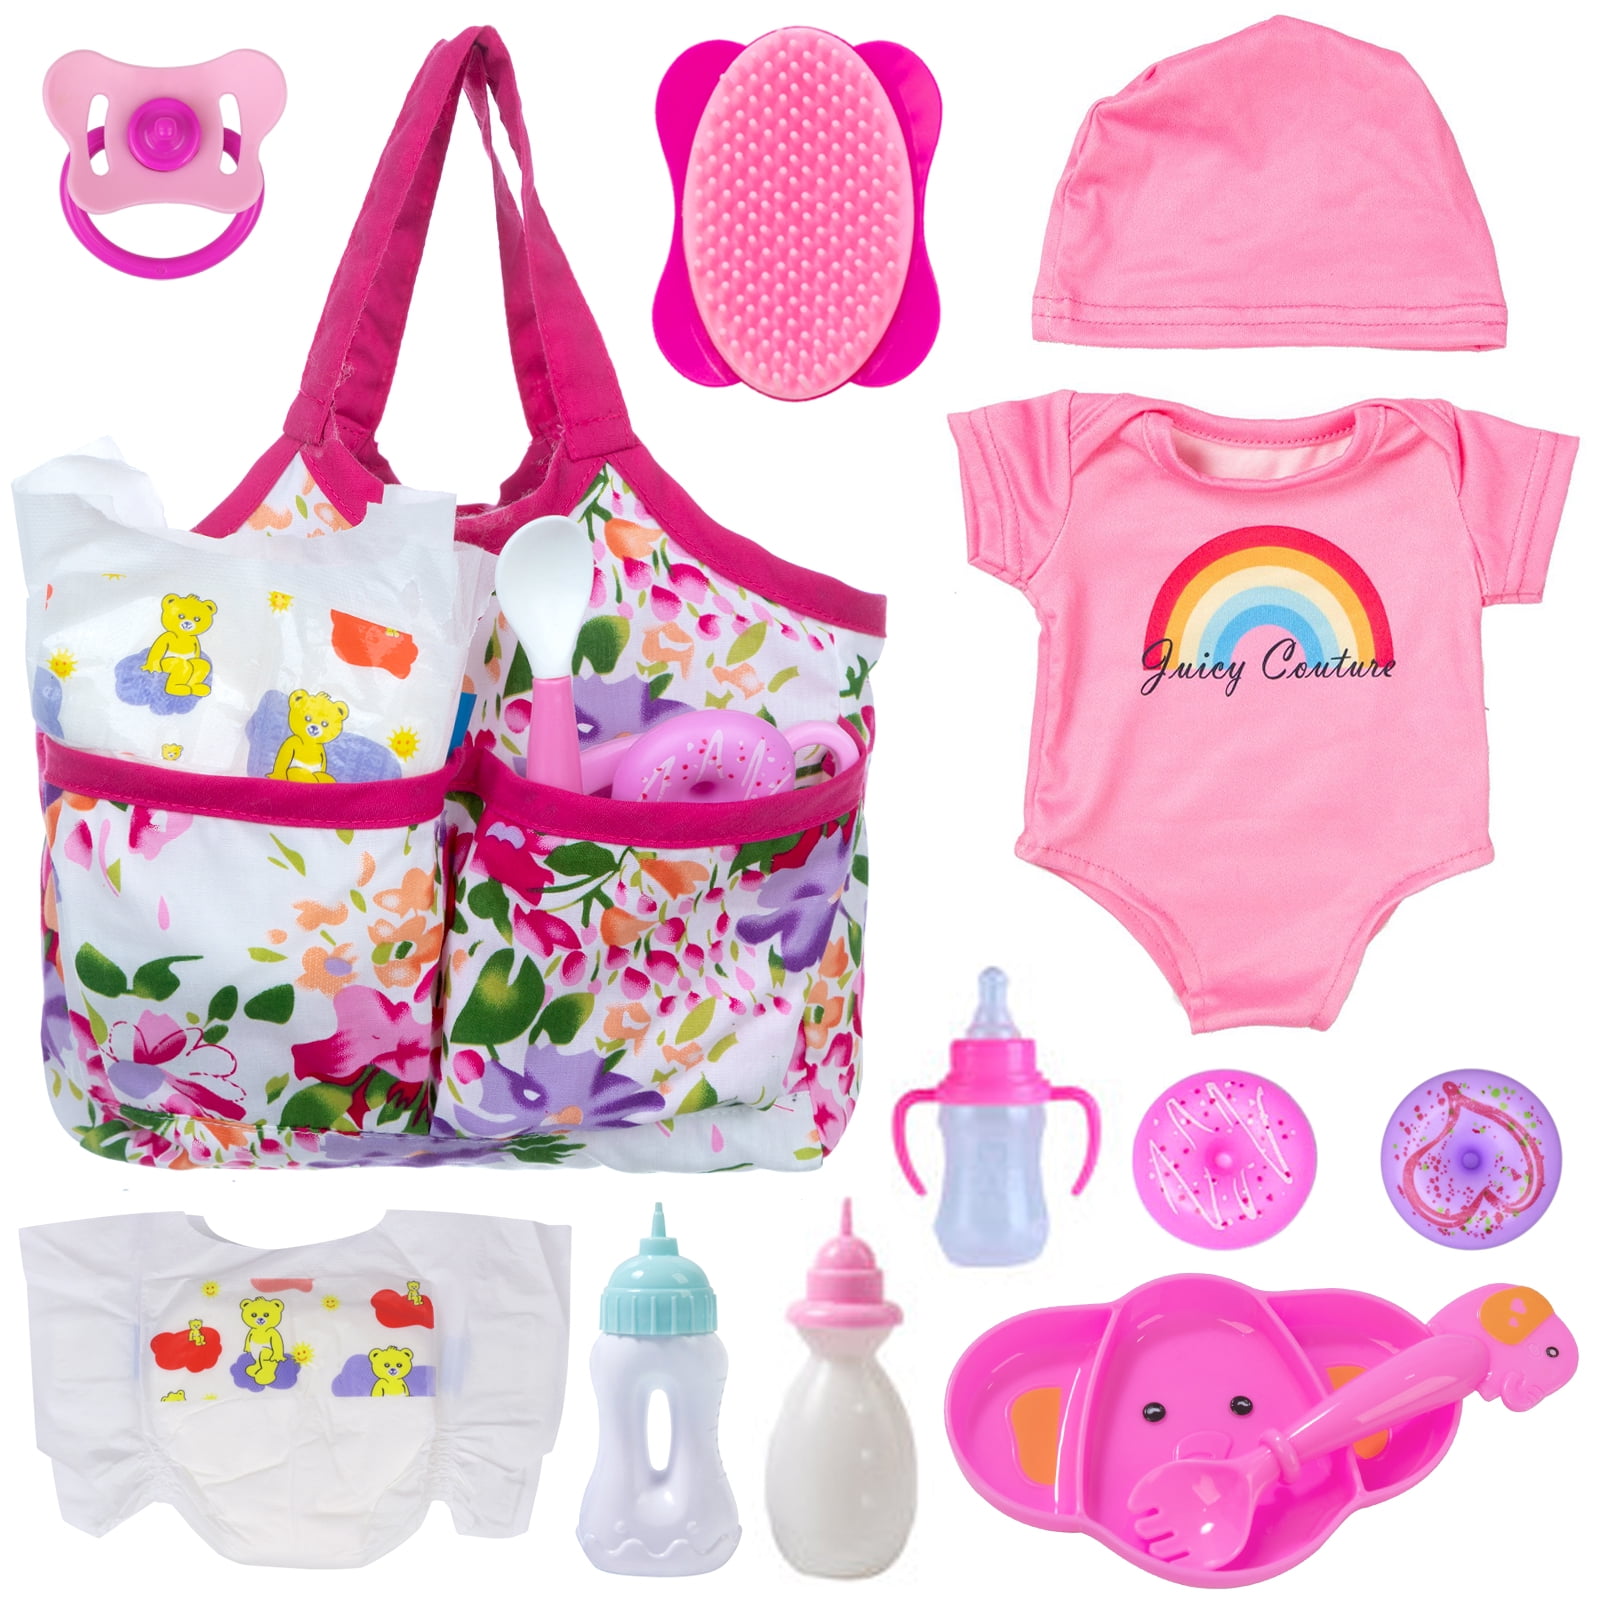 ZITA ELEMENT Baby Doll Accessories 13 Pcs Baby Doll and Caring Babies Pretend Doll Accessories Including Baby Doll Diaper Bag, Diapers, Clothes, Bottles, Dinner Pacifier and Comb - Walmart.com